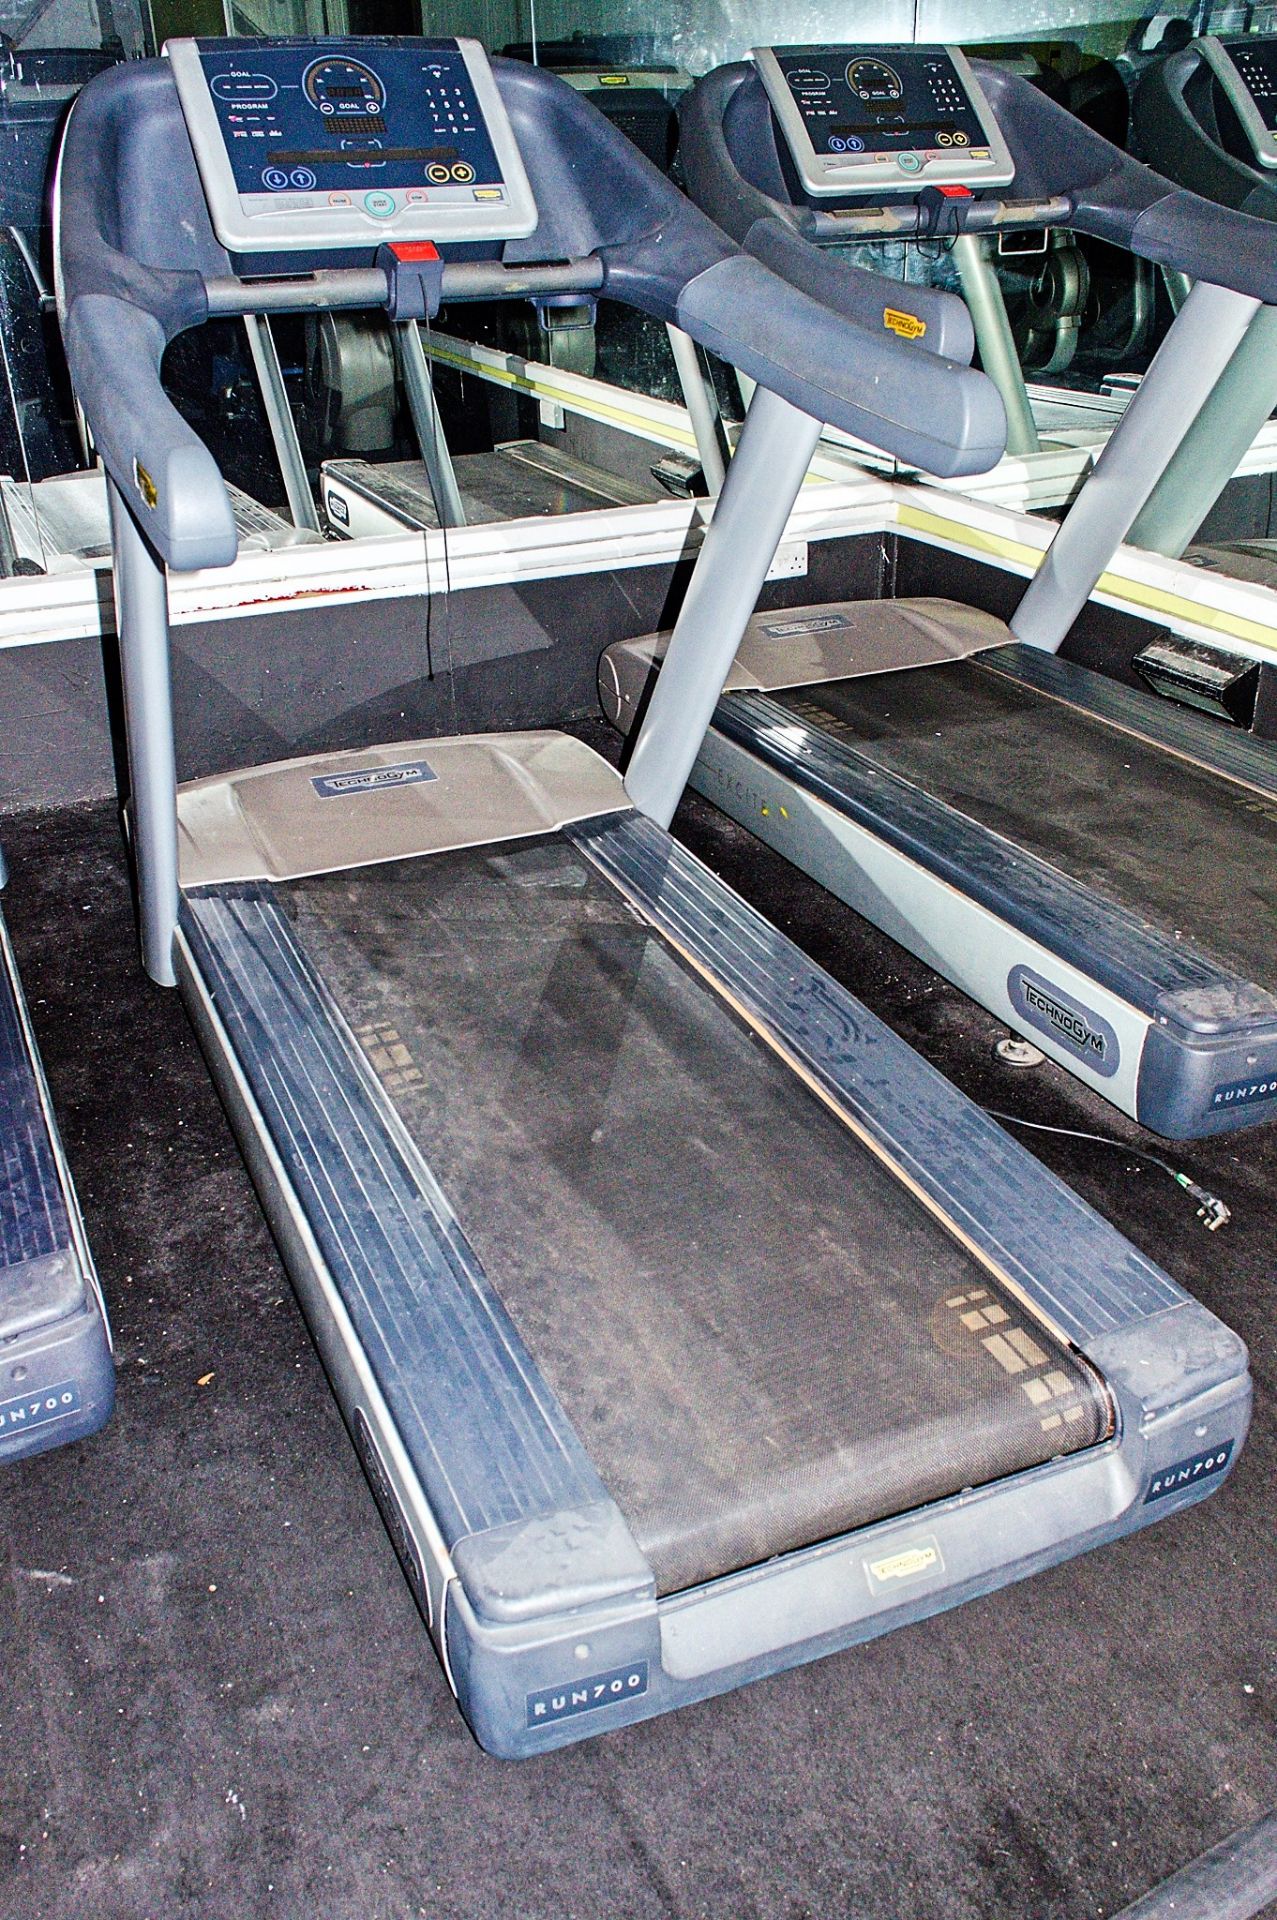 Technogym Excite Run 700 treadmill ** No VAT on hammer price but VAT will be charged on buyers